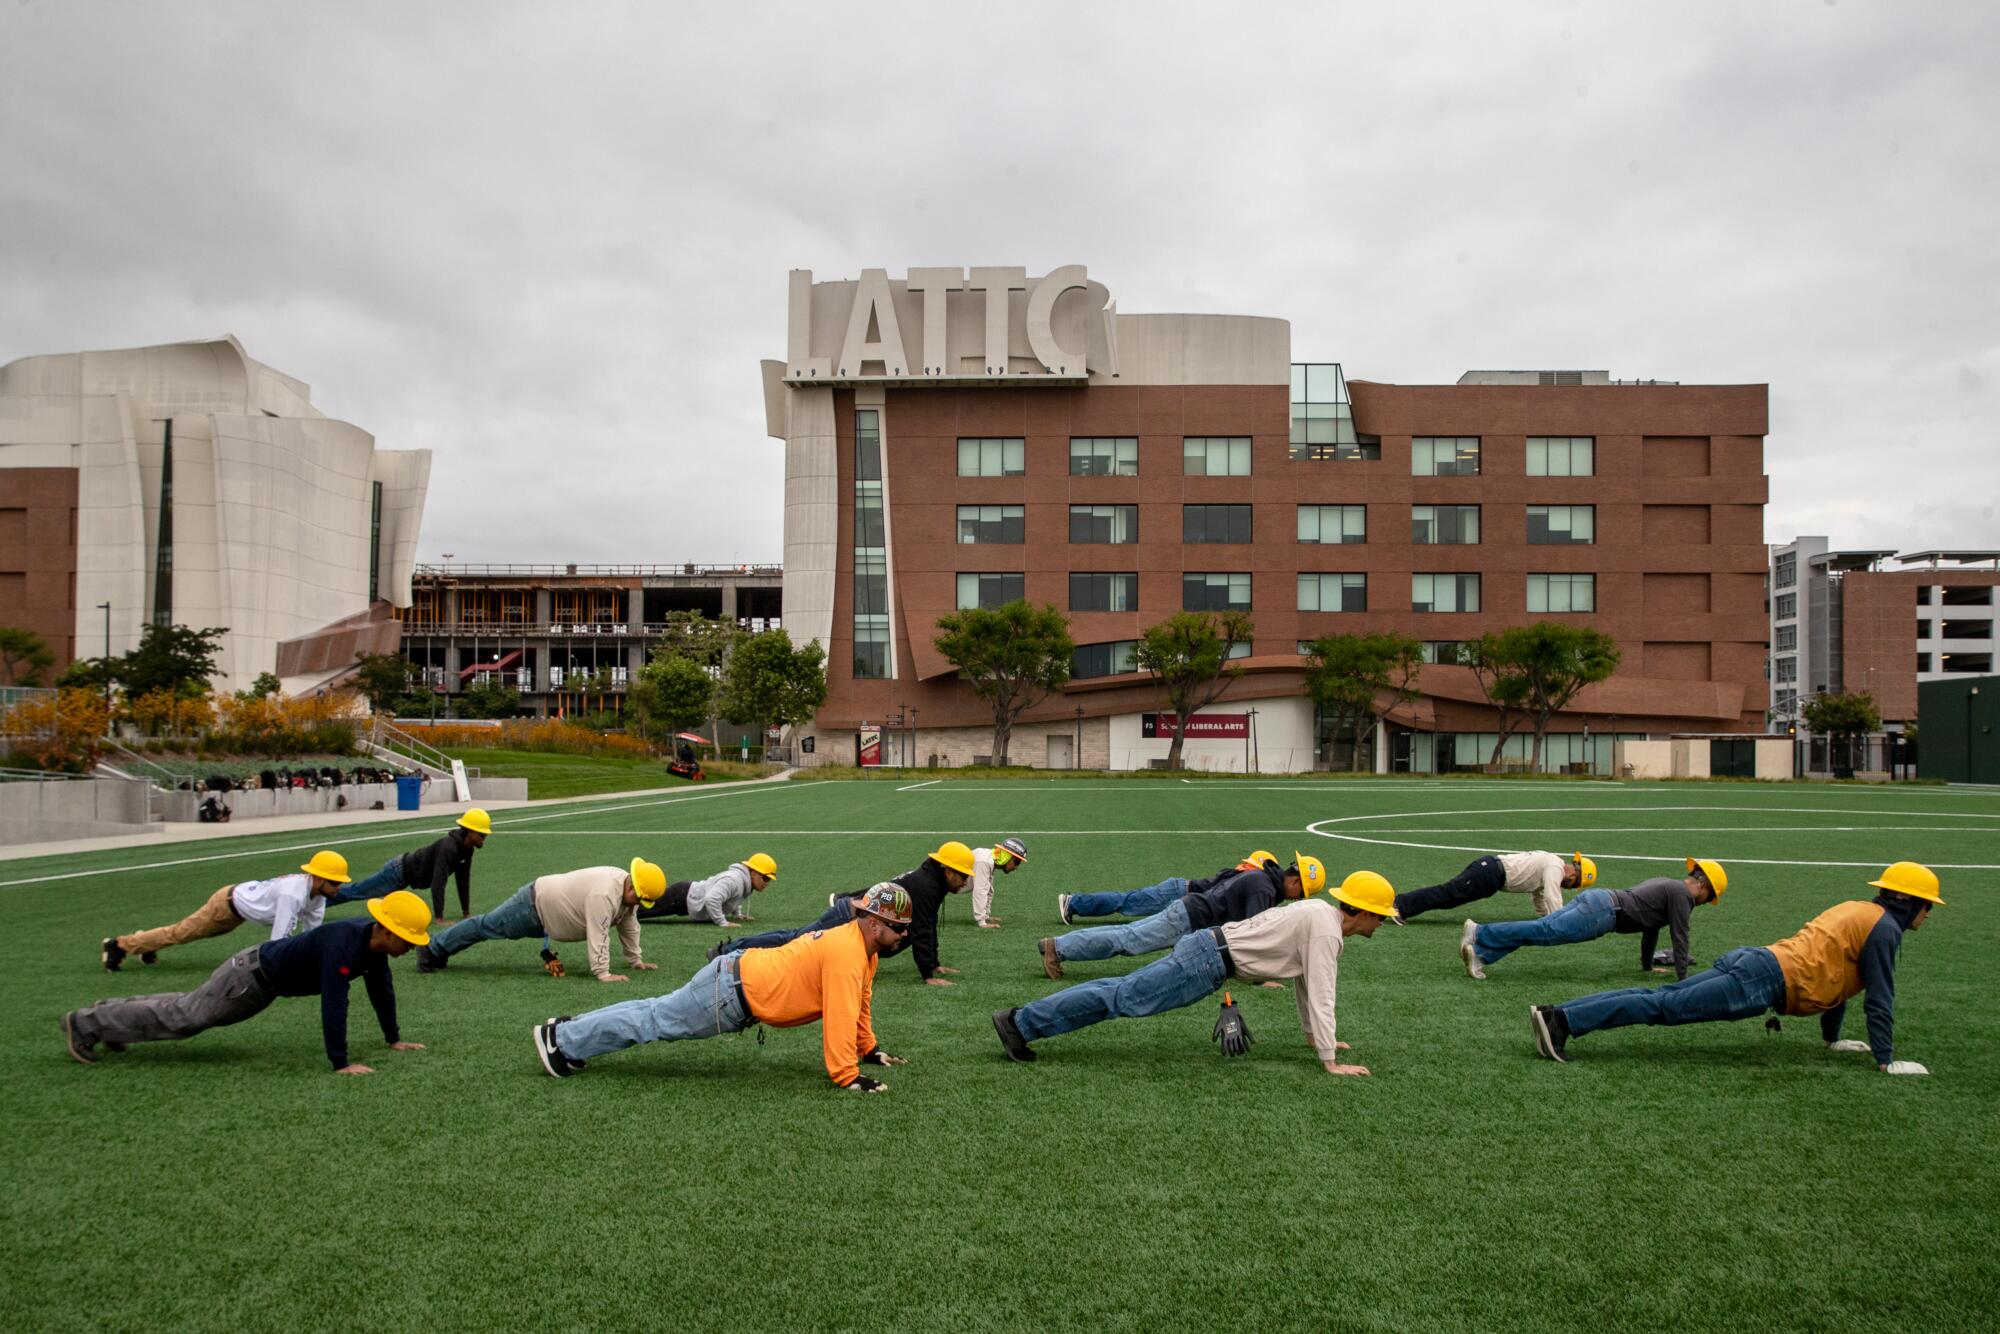 Students do exercises on a grassy field